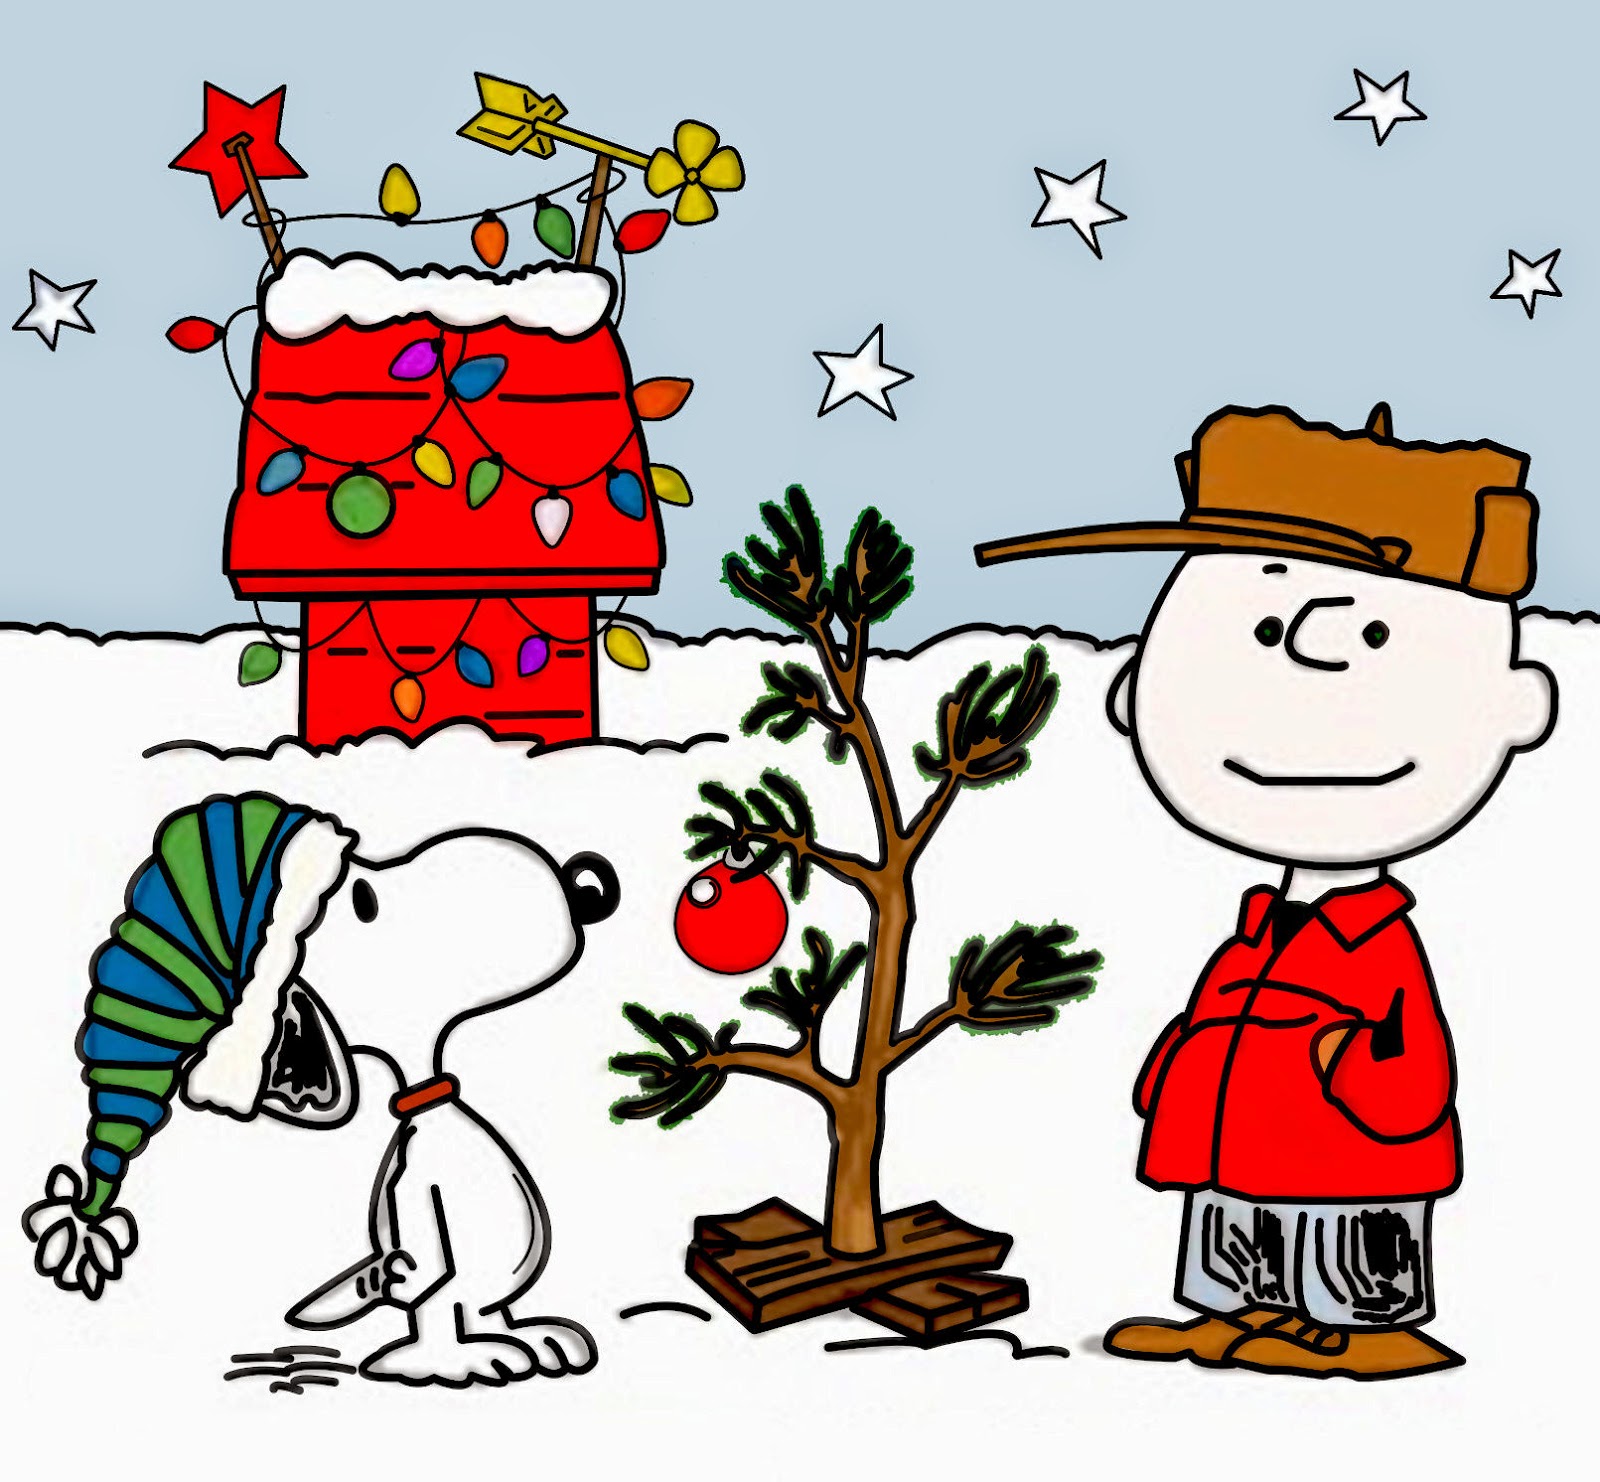 "A Charlie Brown Christmas" has been synonymous with the Christmas Season Be sure to check it out below